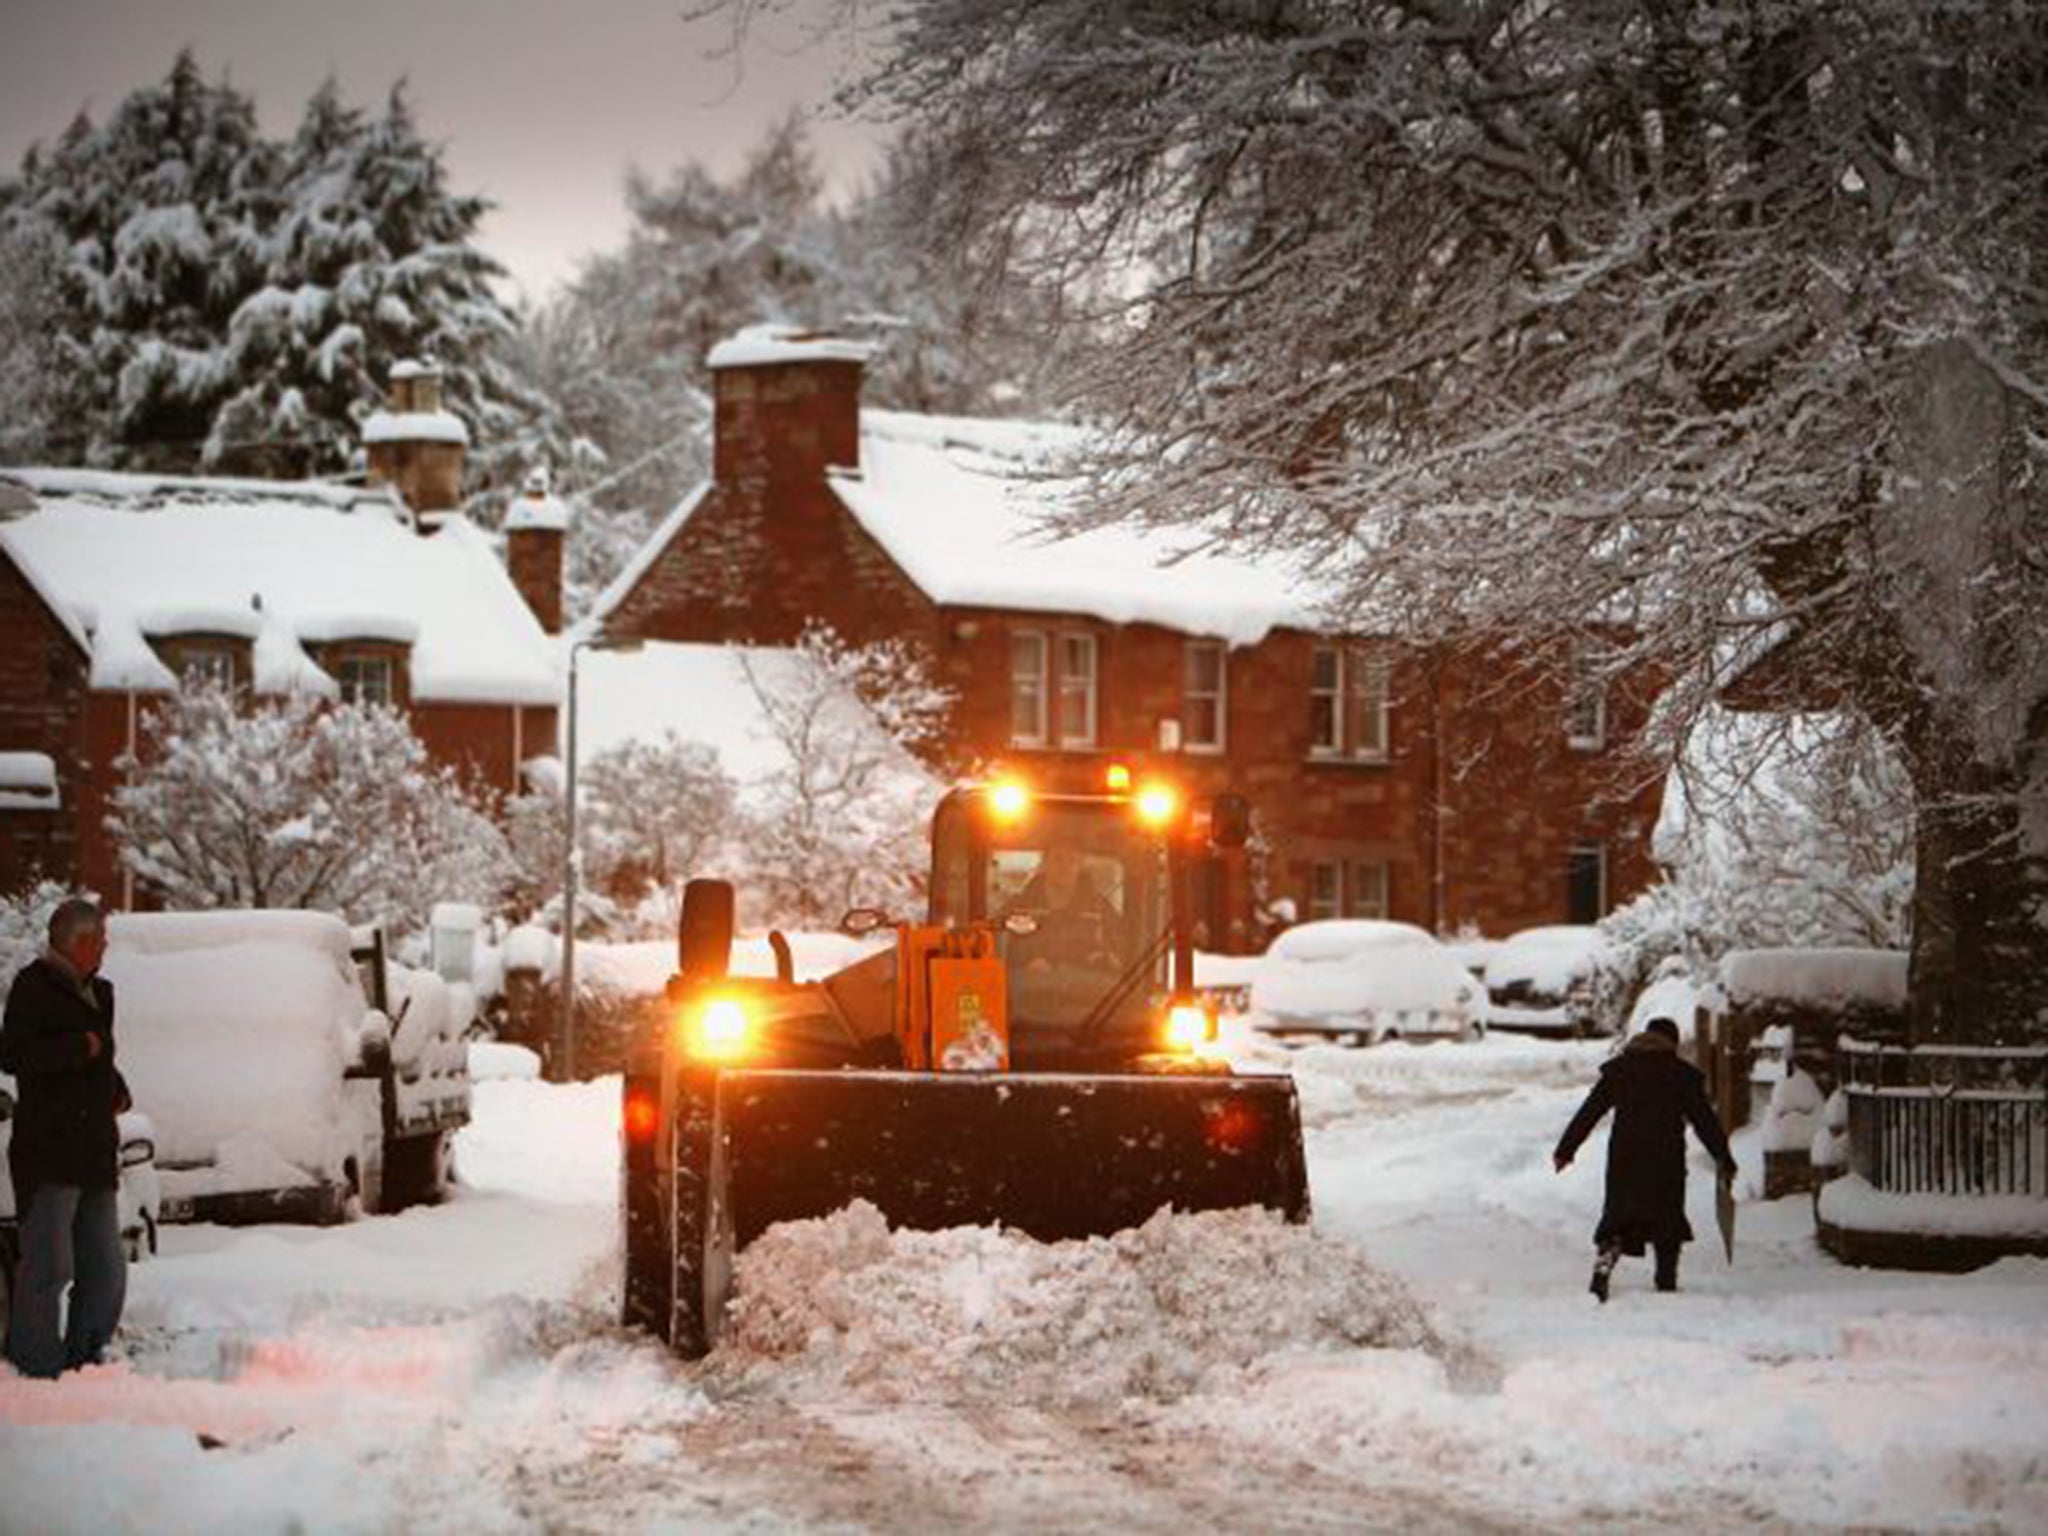 Residents will have to clear their local streets of snow (Getty)